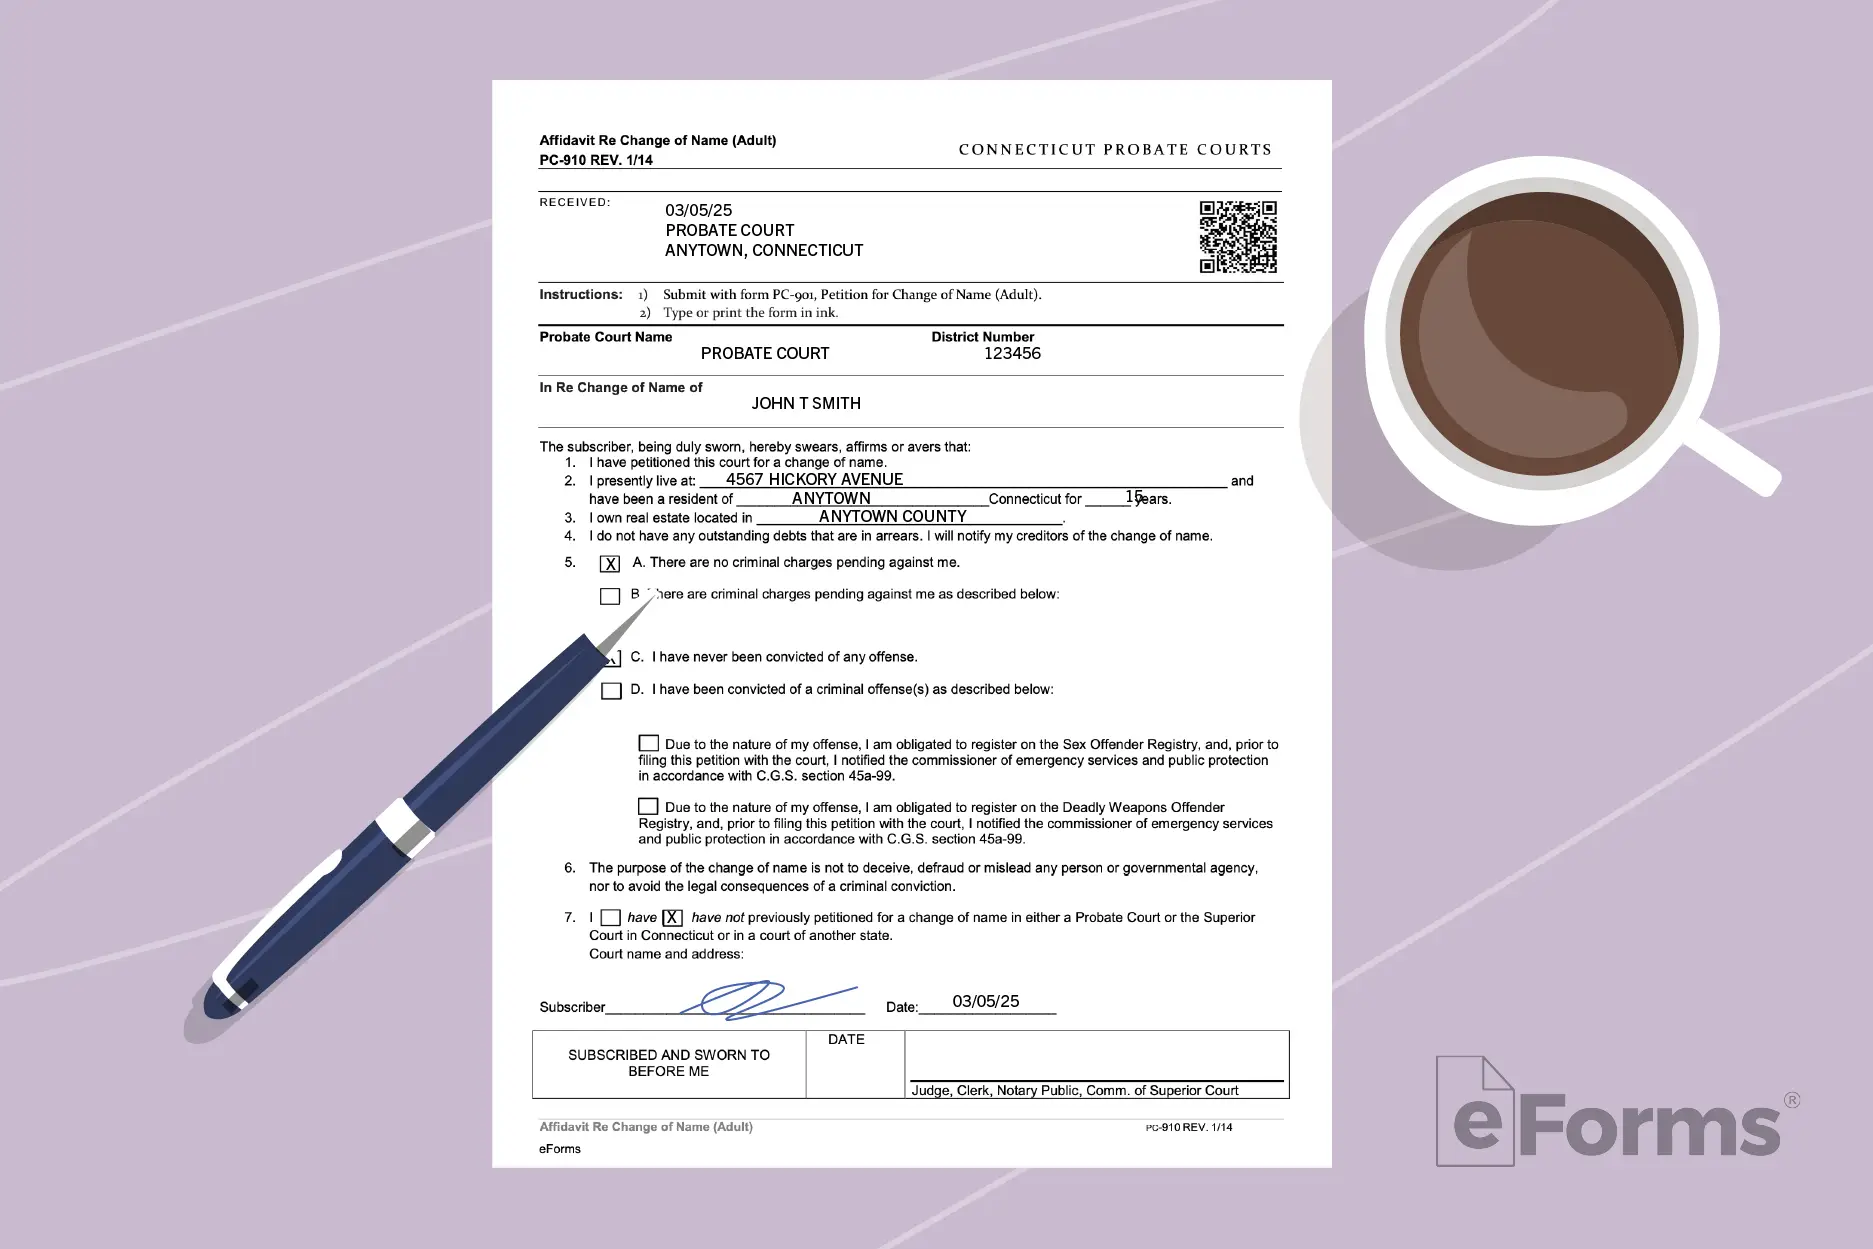 Affidavit form with pen and coffee cup.